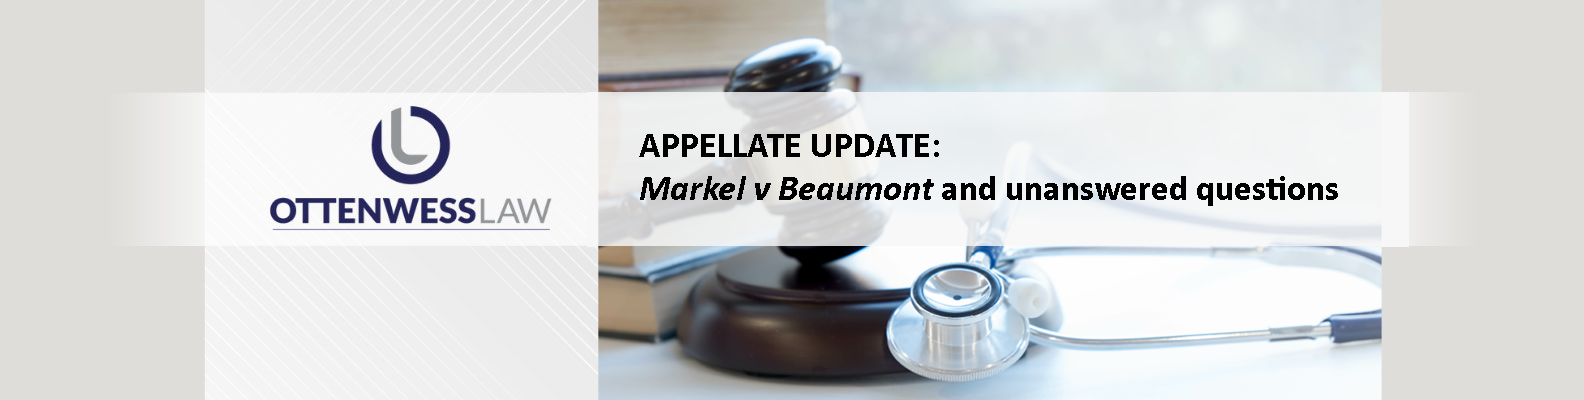 APPELLATE UPDATE: Markel v Beaumont and unanswered questions